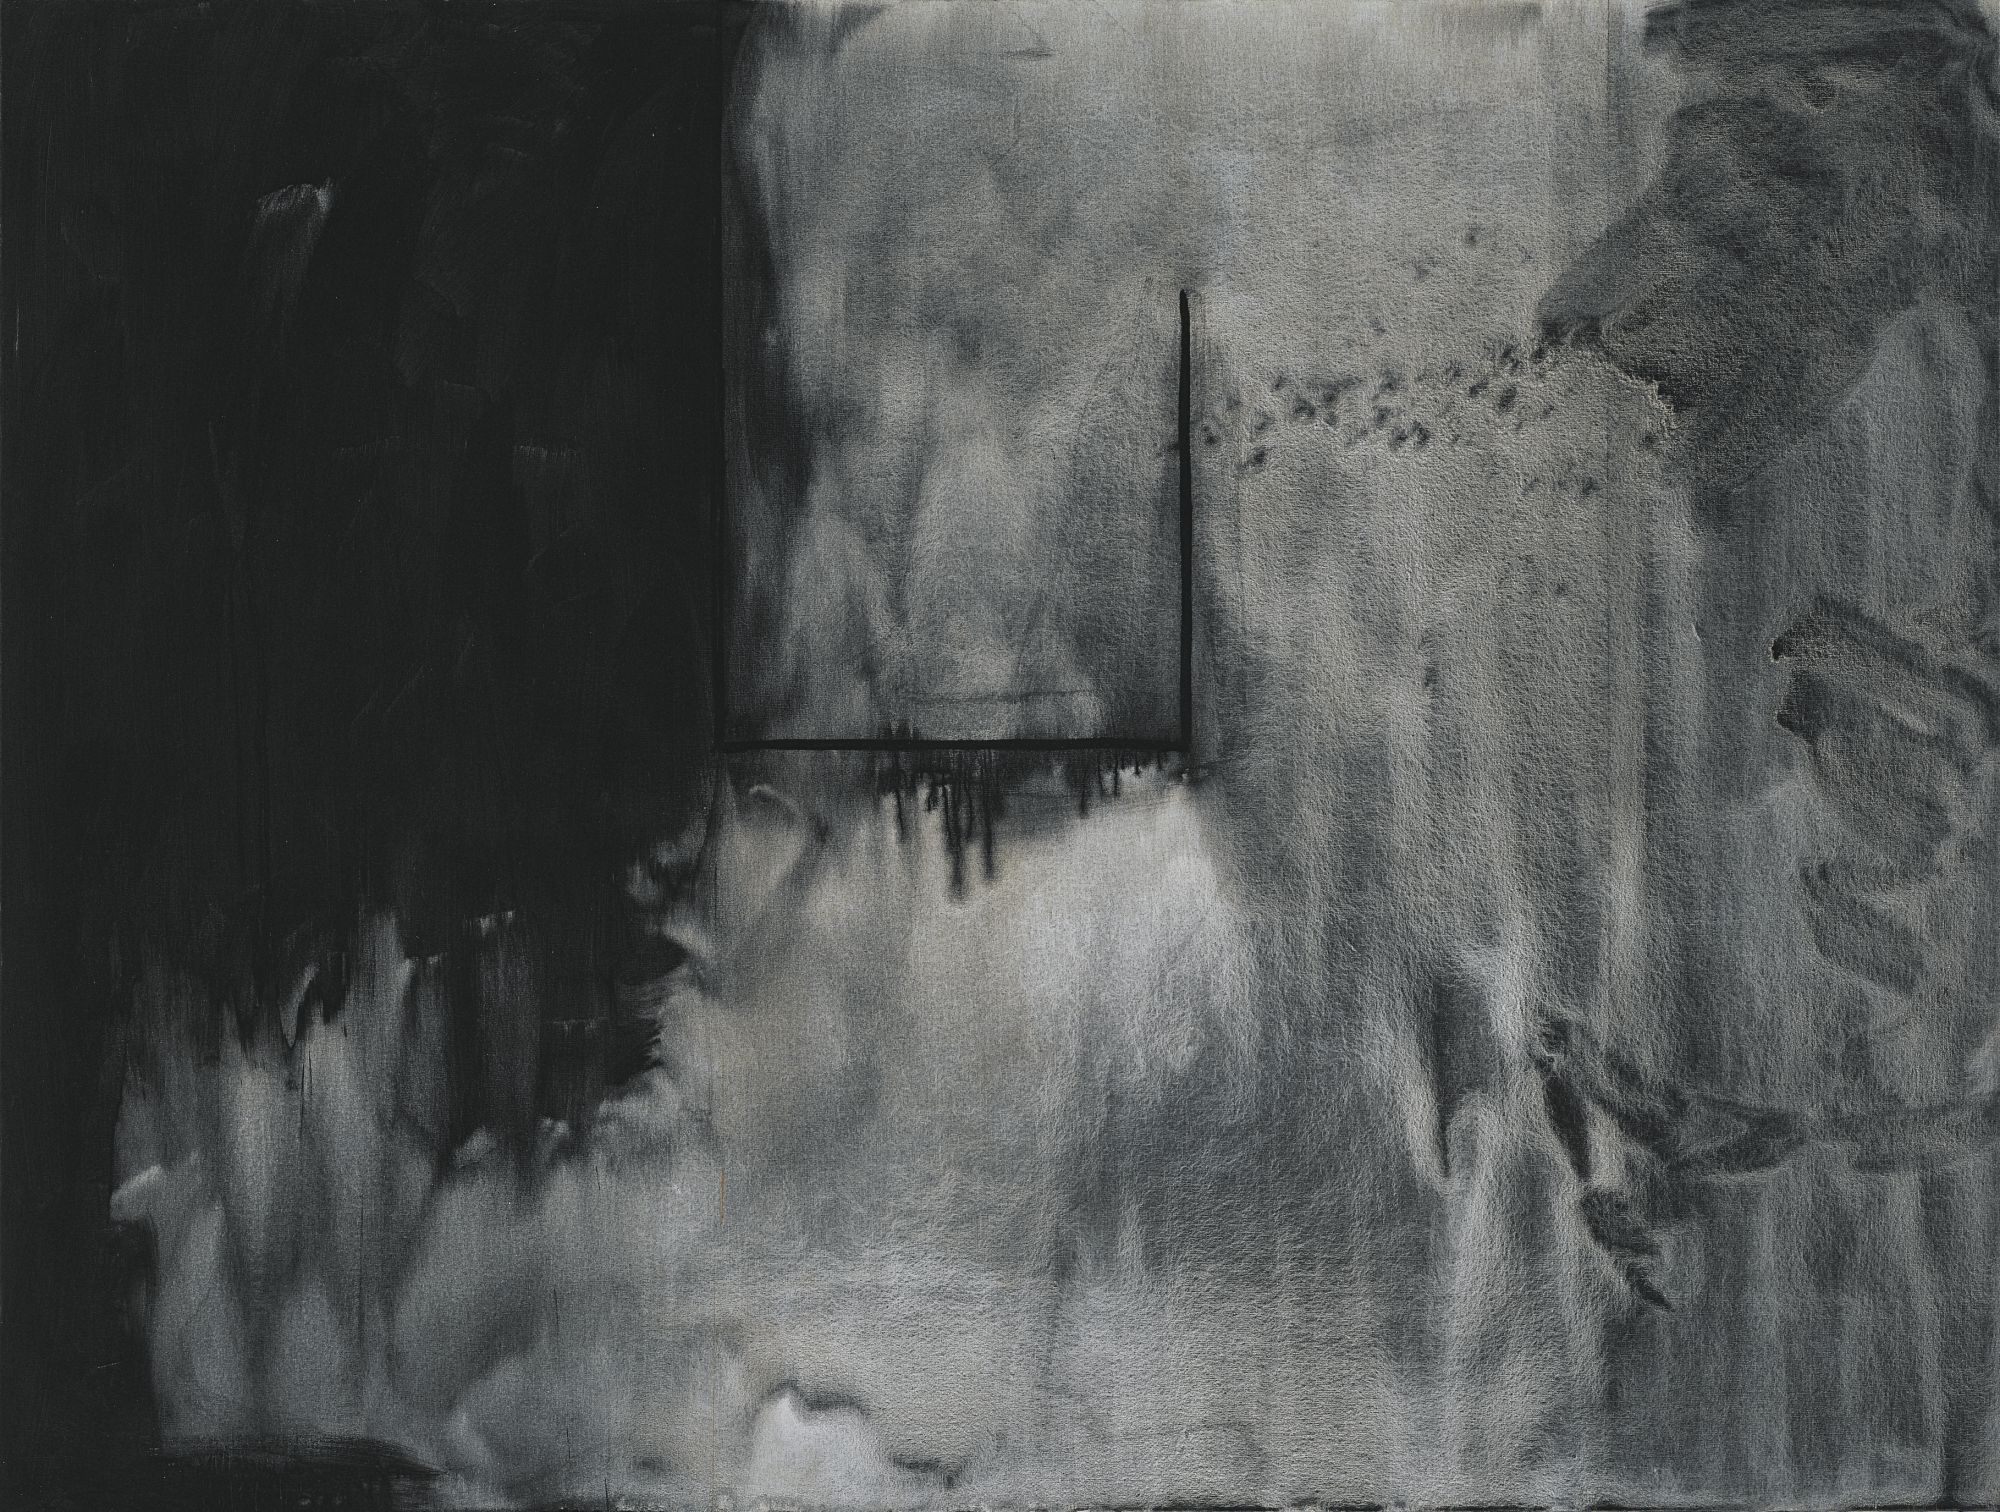 In Plato's Cave No. 1, 1972, acrylic and charcoal on canvas, 72 ✕ 96 in. (182.9 ✕ 243.8 cm)